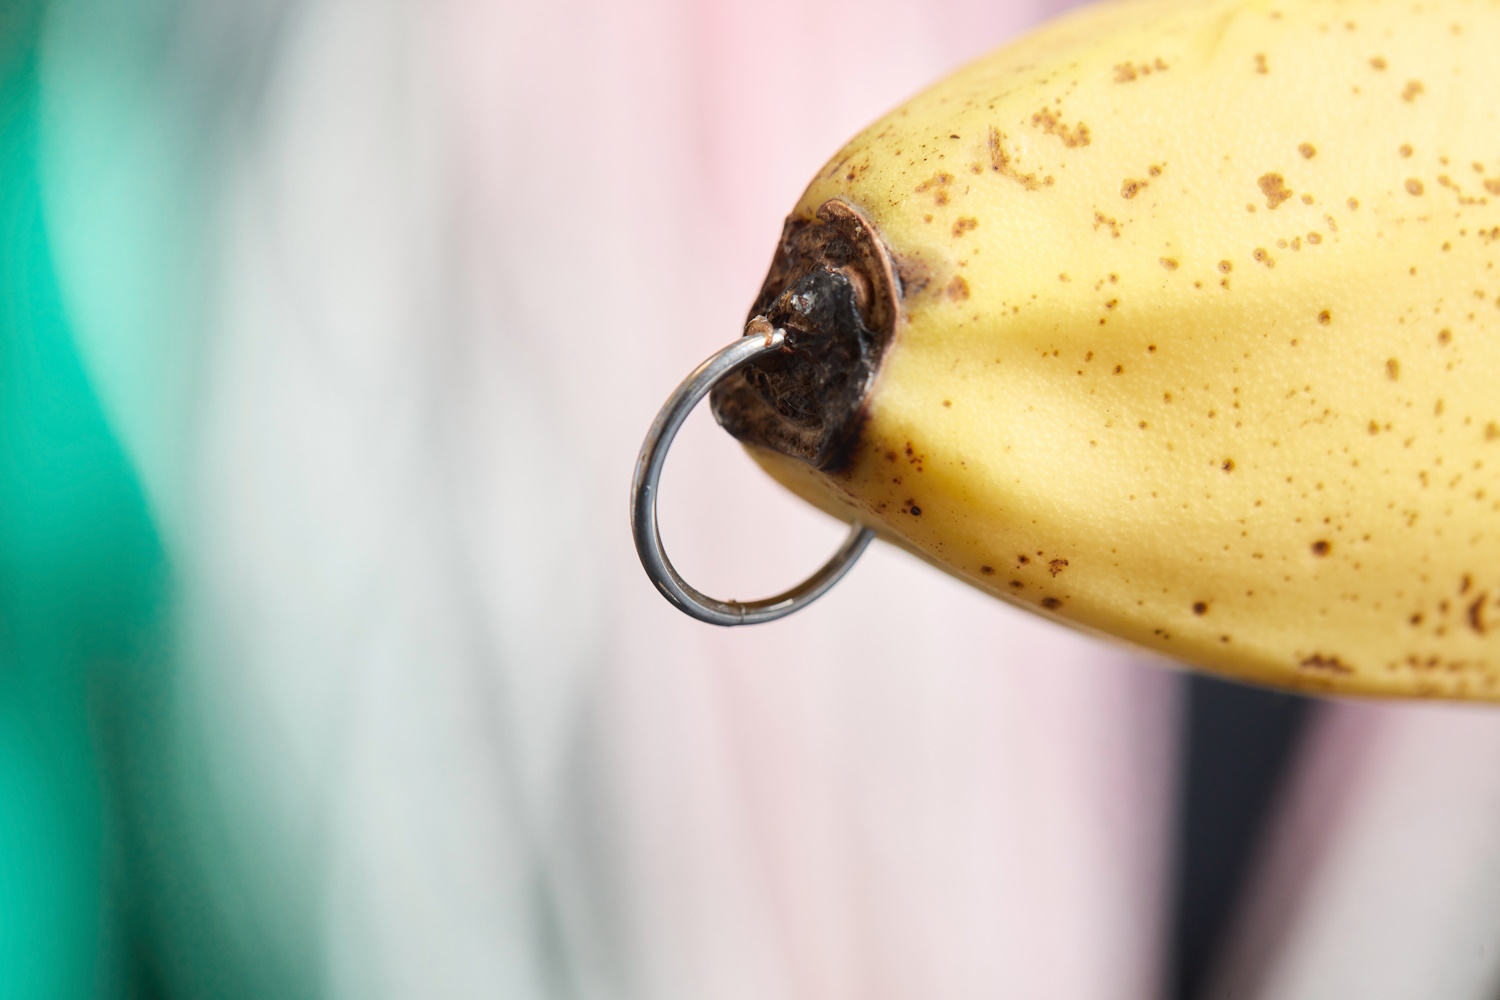 An example using a banana of what a penis piercing would look like.